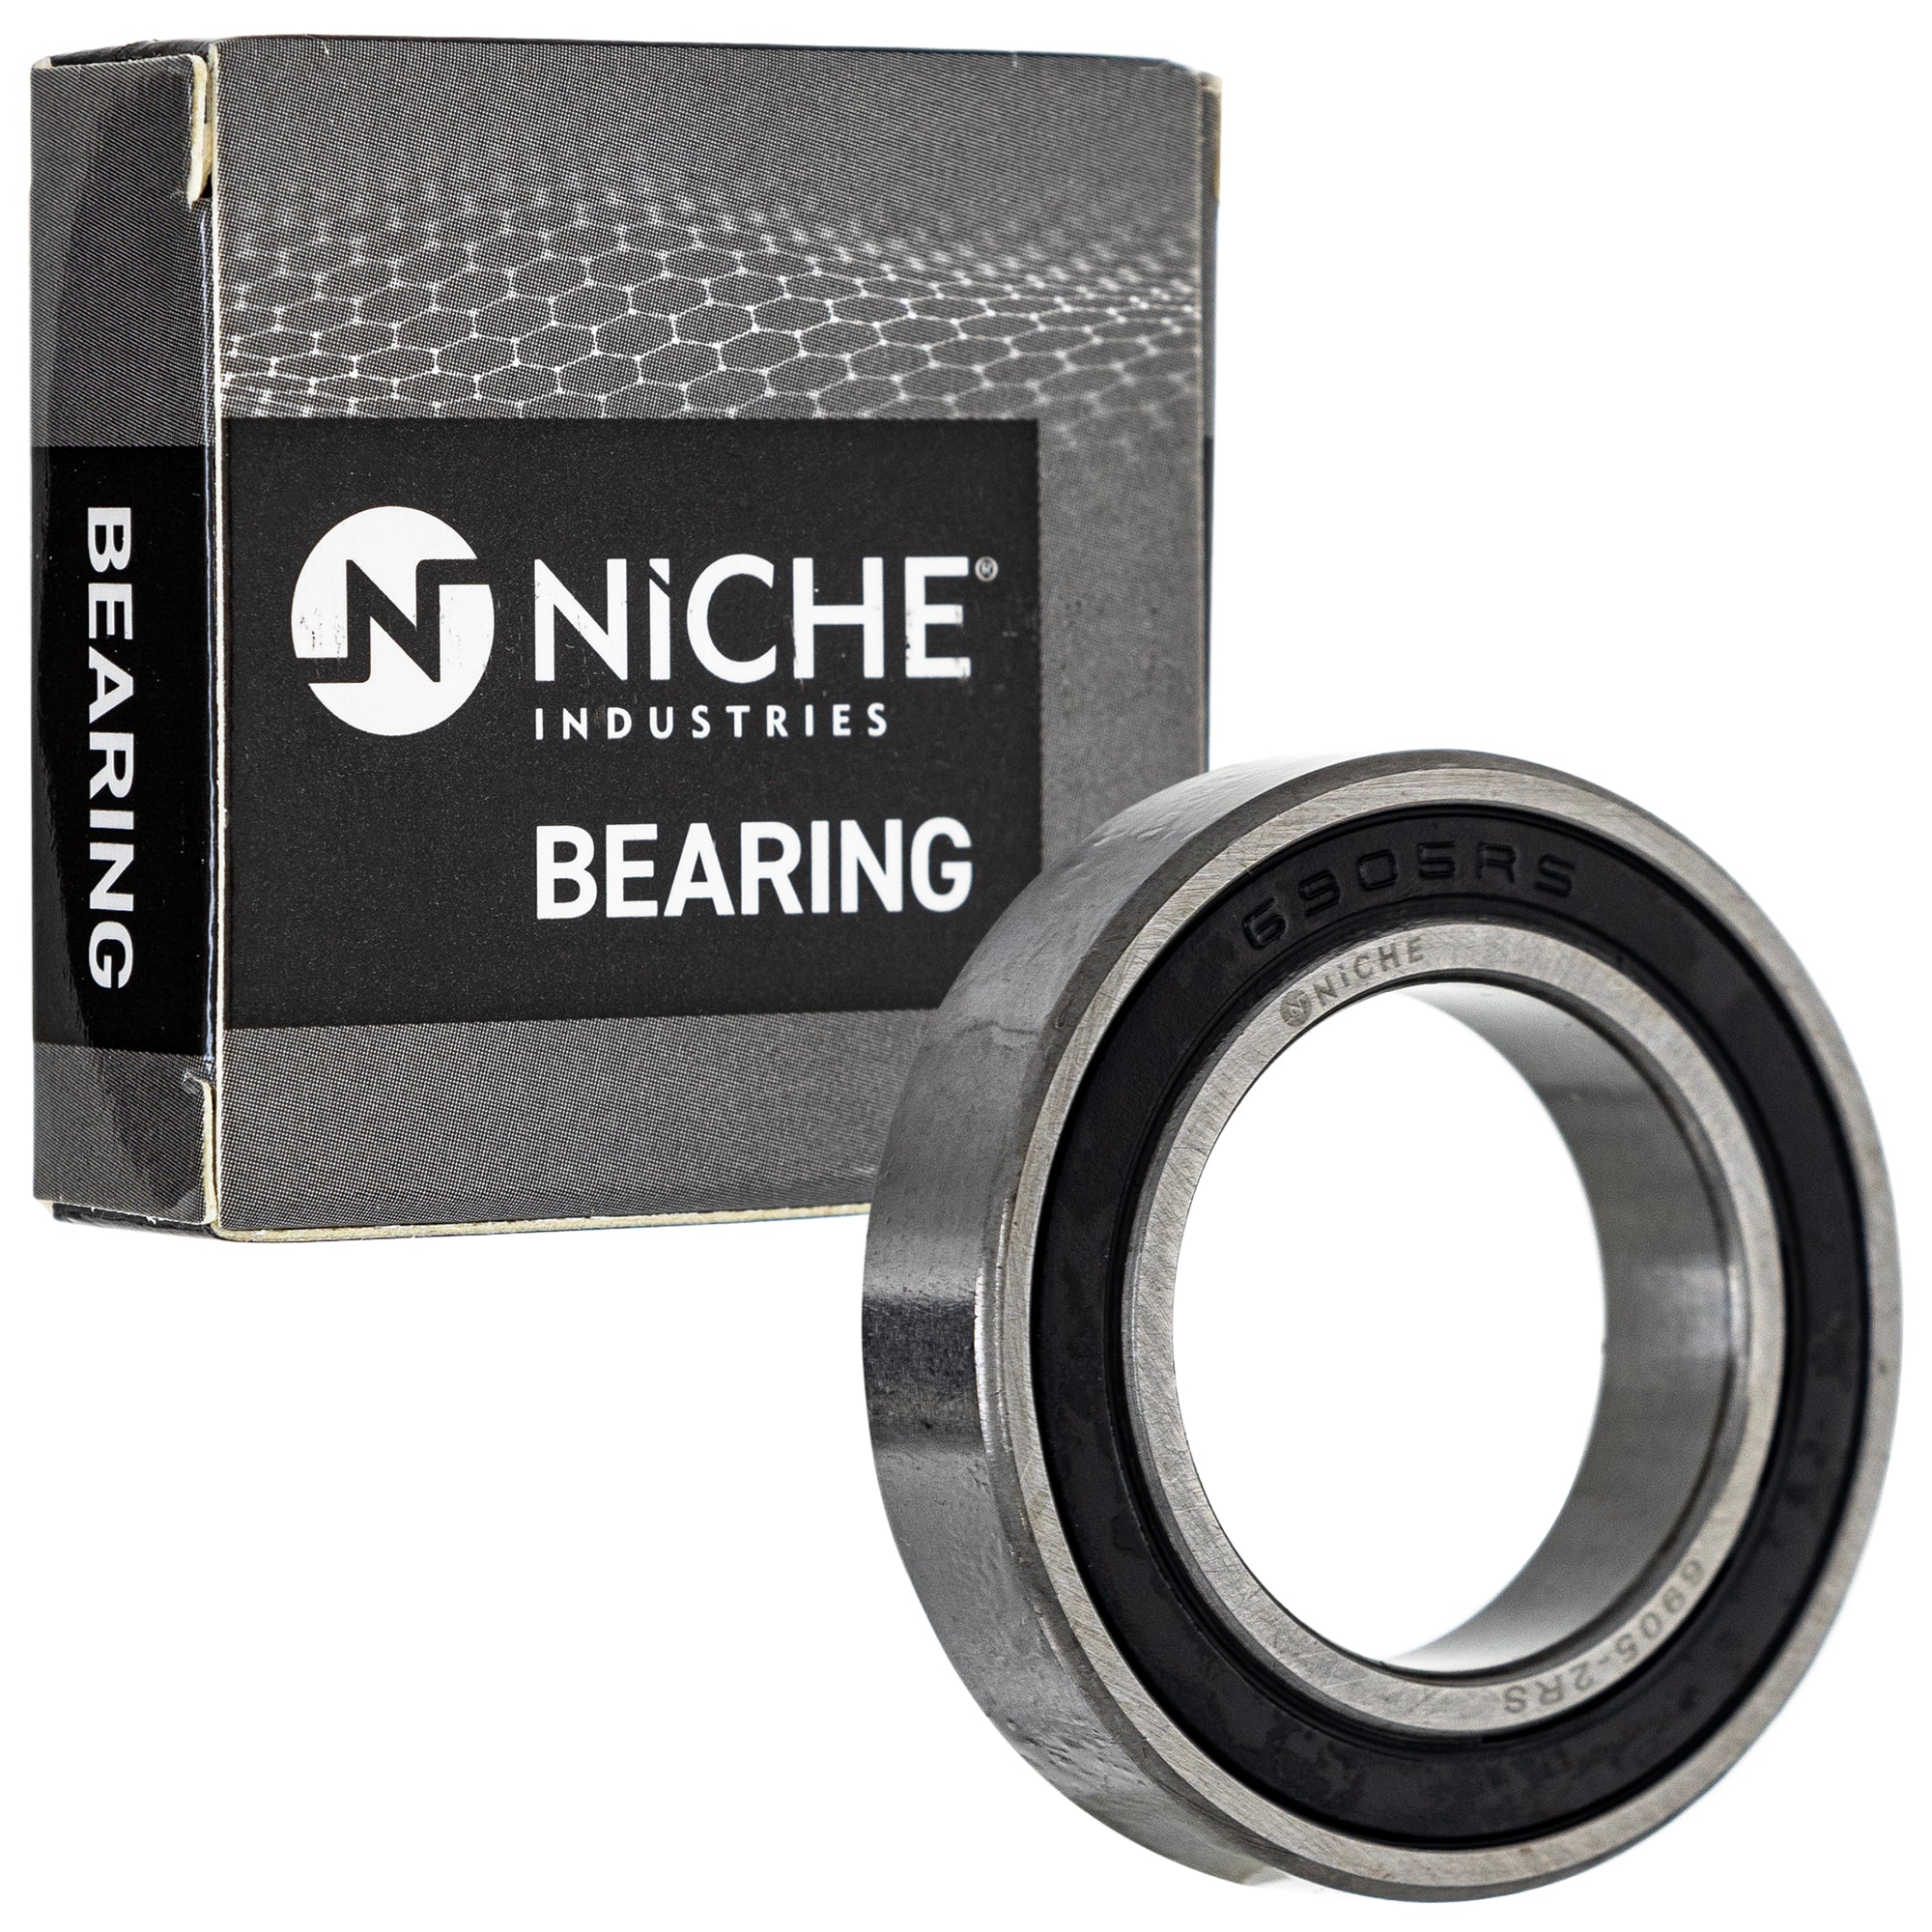 NICHE 519-CBB2251R Bearing 2-Pack for zOTHER ZZR600 Zephyr Z1000 W650